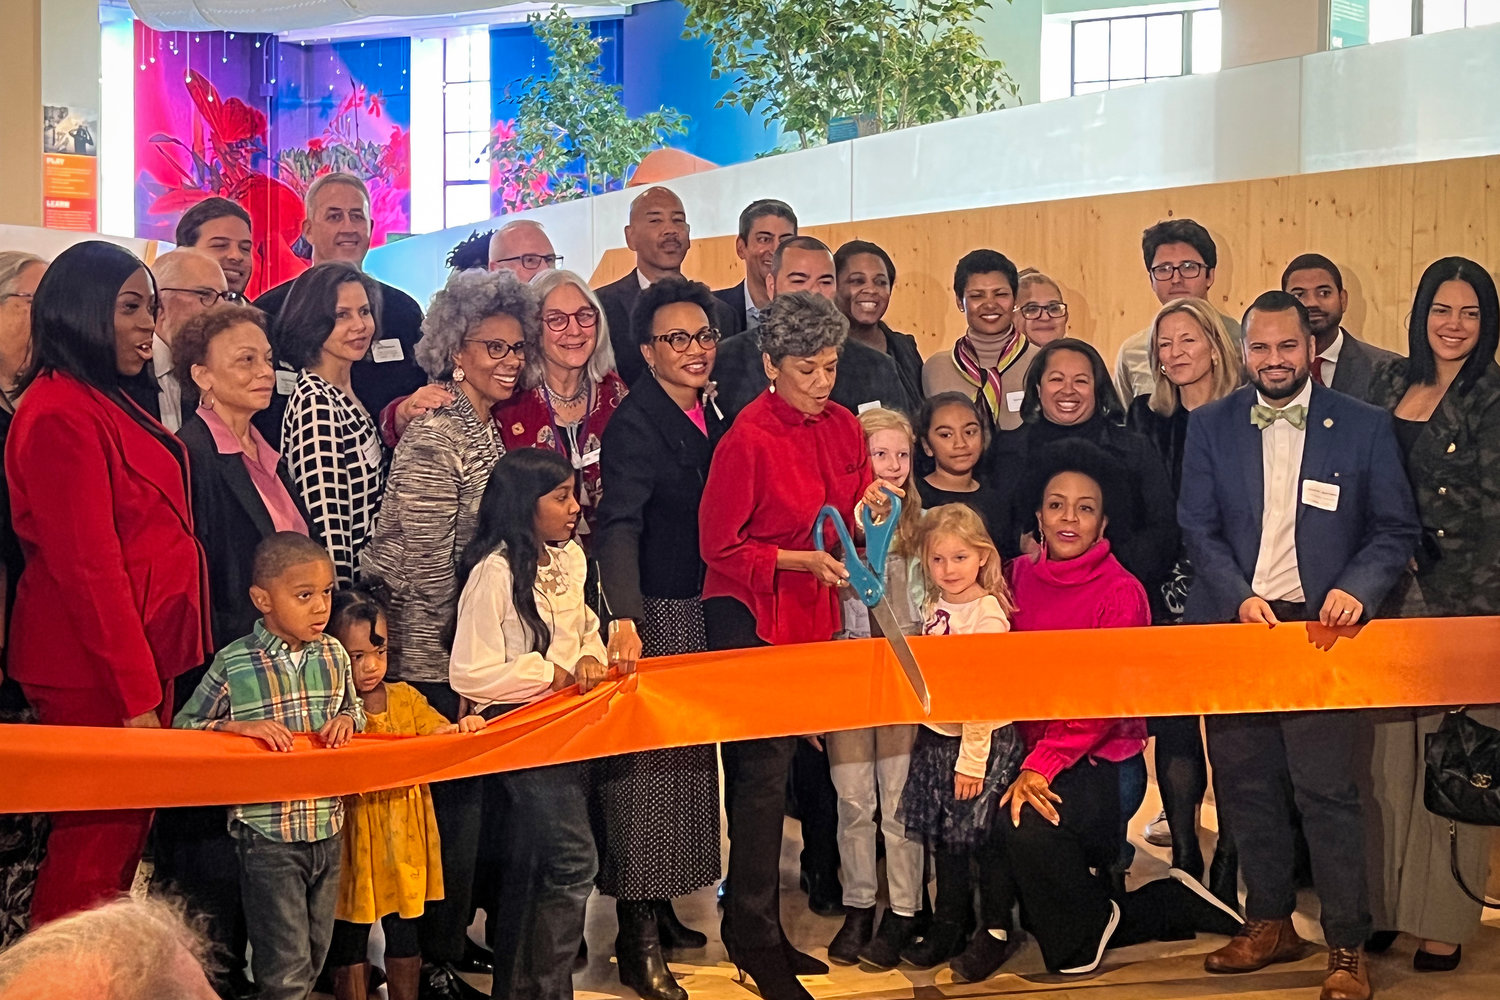 Past and present local electeds, city agency officials, donors, and board members gathered with the staff of the Bronx Children’s Museum to witness Sonia Manzano, who plays Maria on Sesame Street, cut the ribbon in the museum’s new space at 725 Exterior St. on Nov. 16.